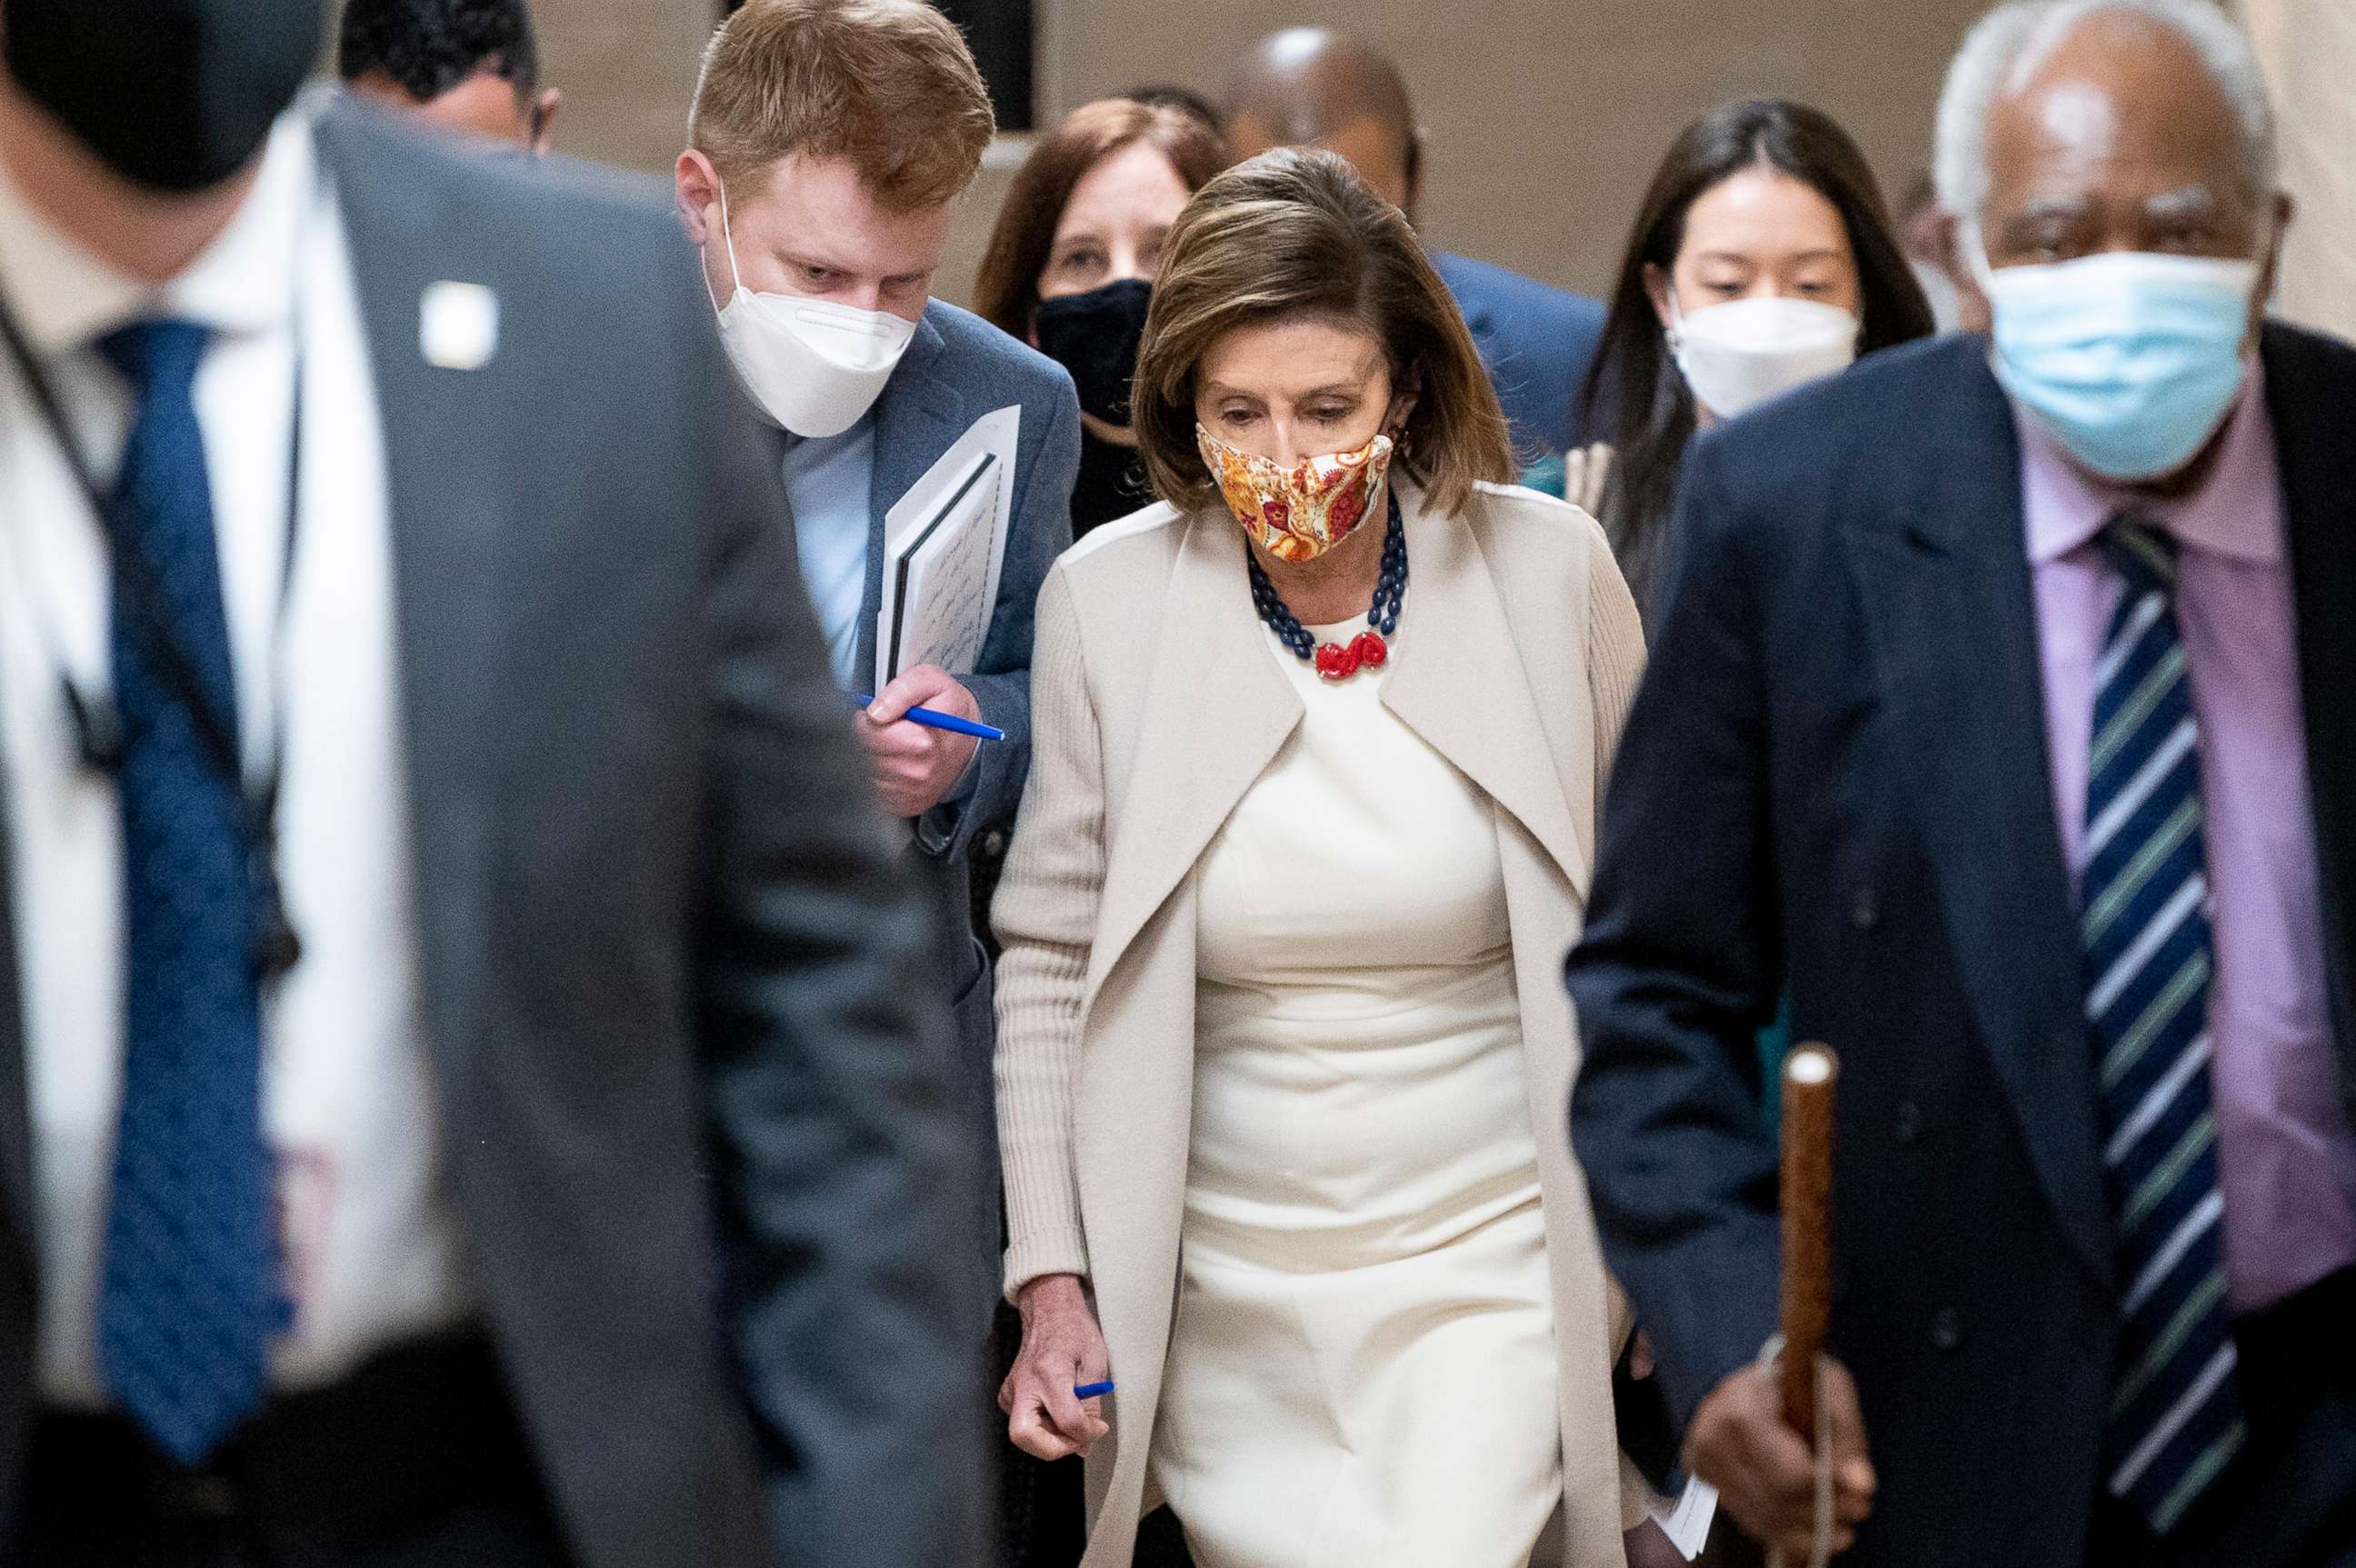 PHOTO: Speaker of the House Nancy Pelosi leaves the House Democrats caucus meeting in the basement of the Capitol as she walks to hold her weekly news conference on Nov. 4, 2021.